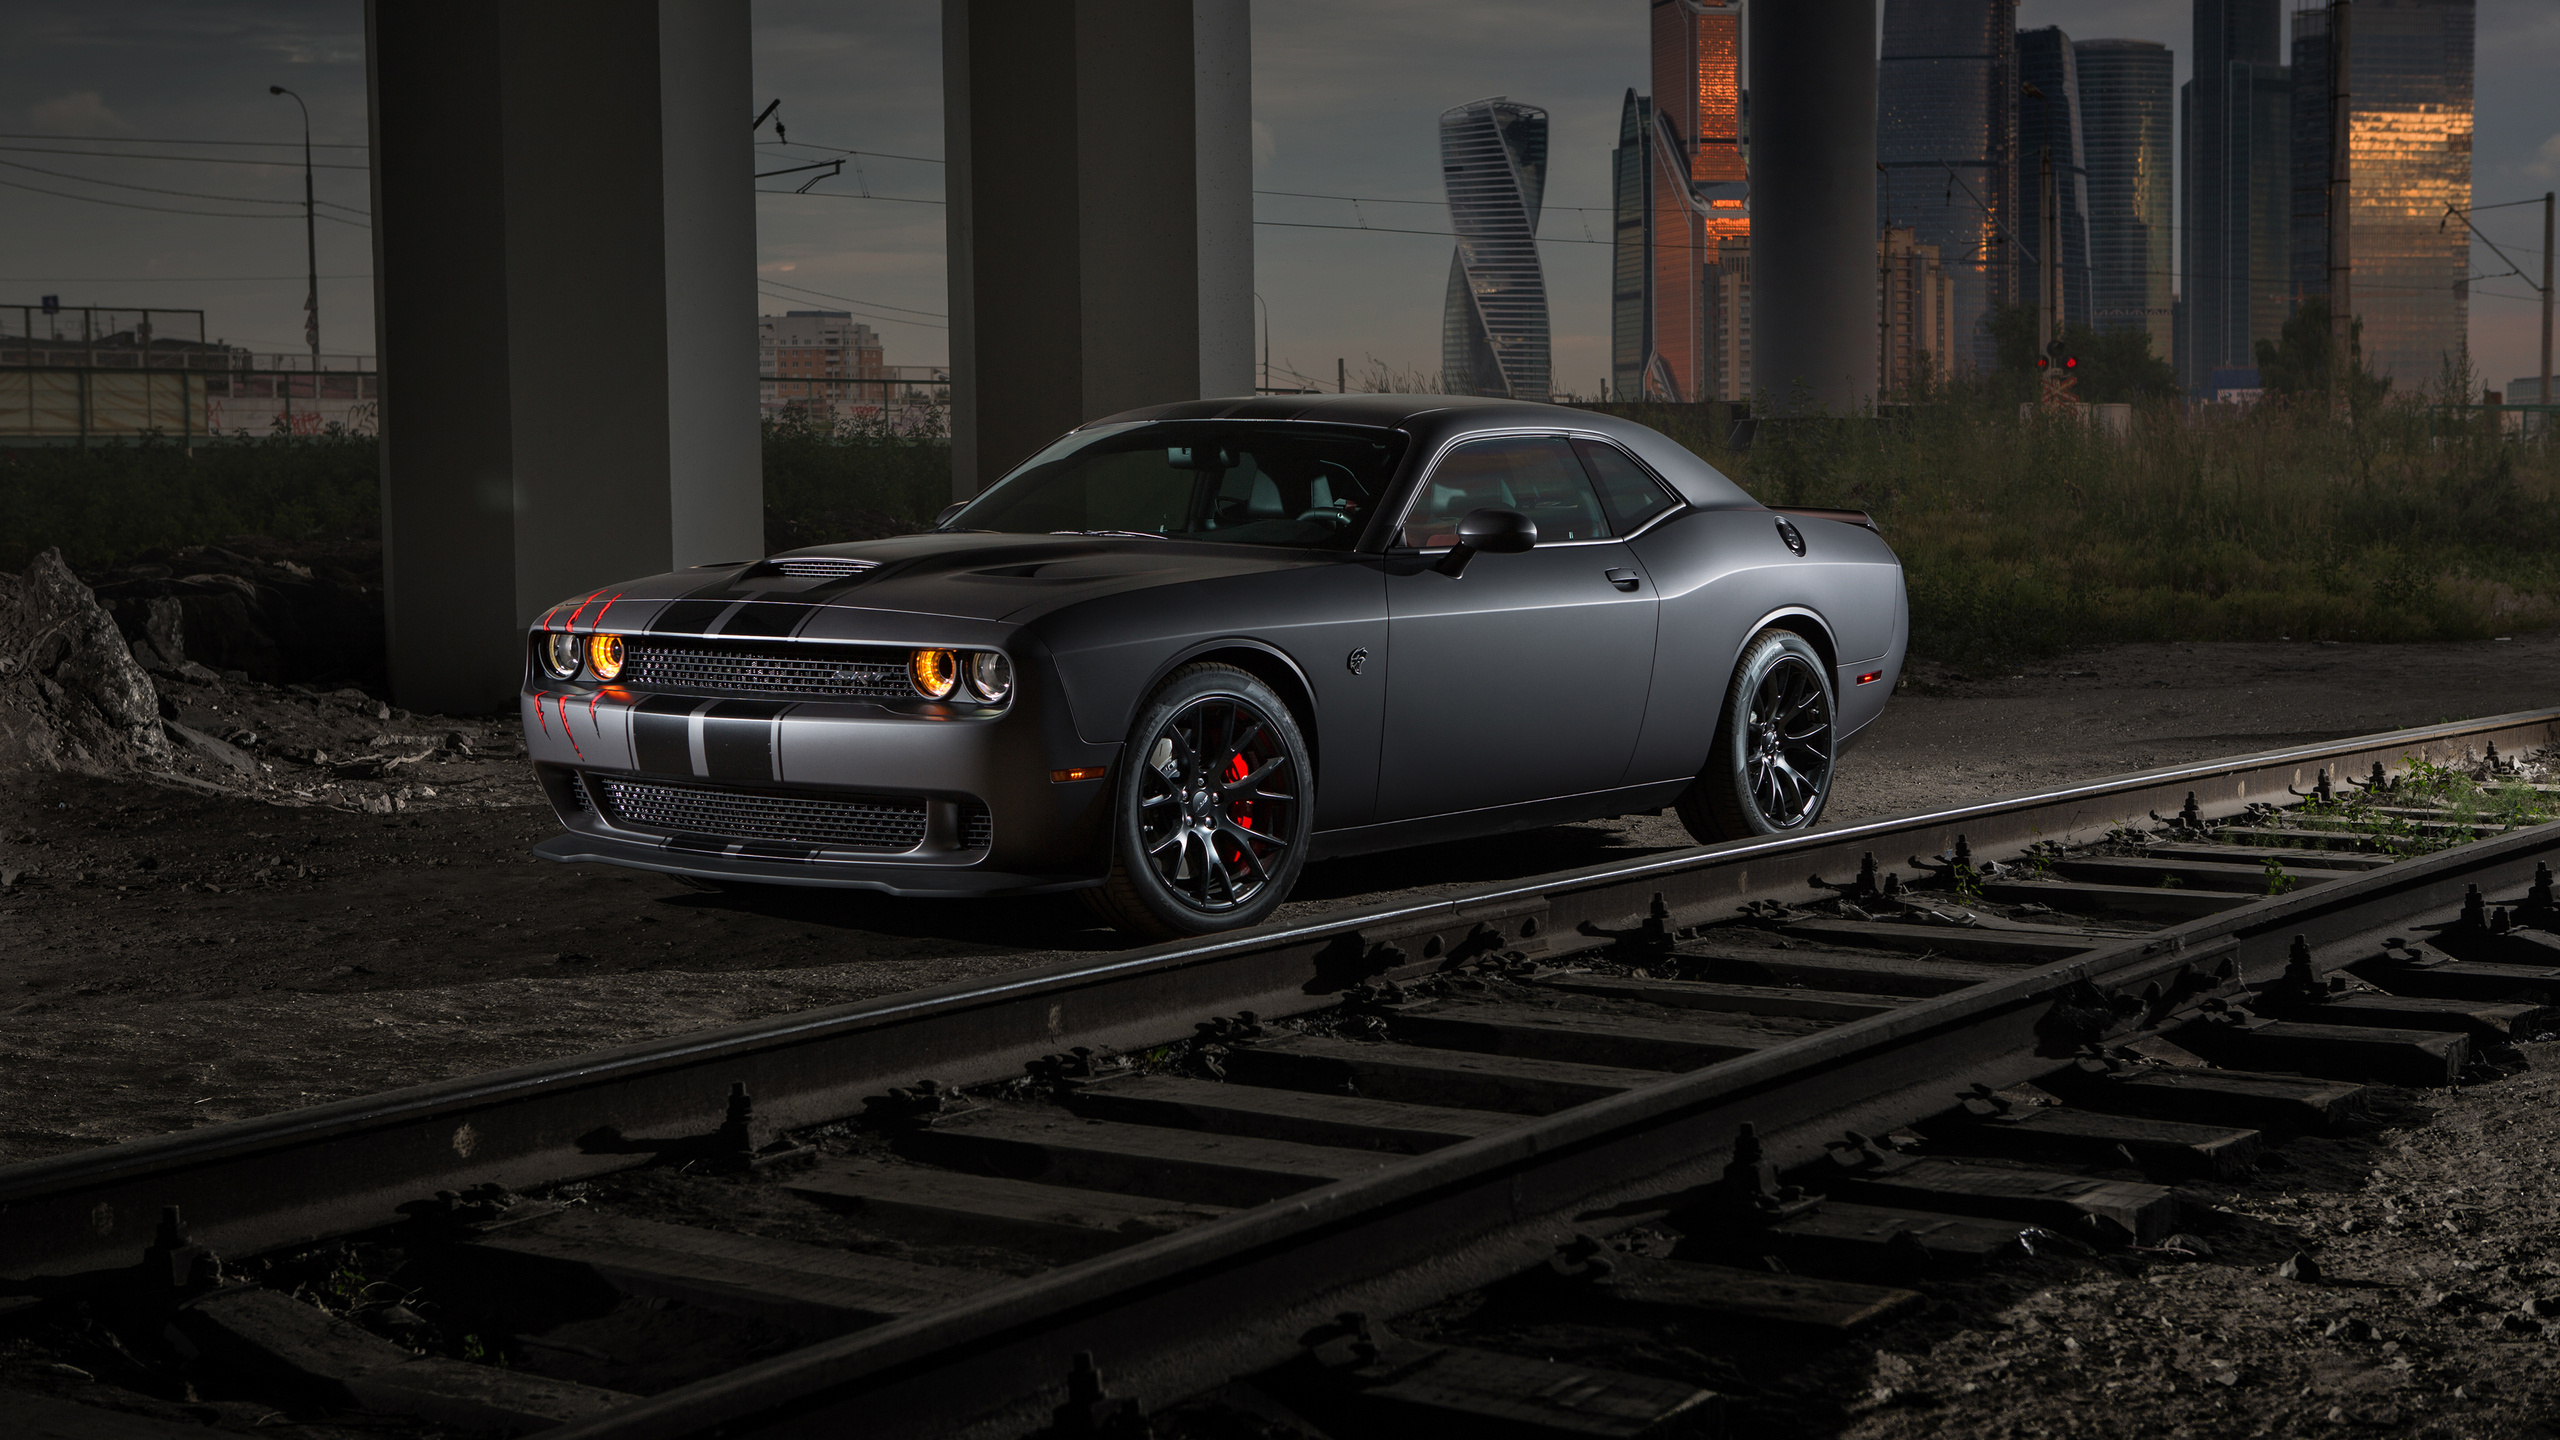 Dodge Challenger srt hellcat 1440p, Pinnacle of performance, Uncompromising power, Thrill of the track, 2560x1440 HD Desktop